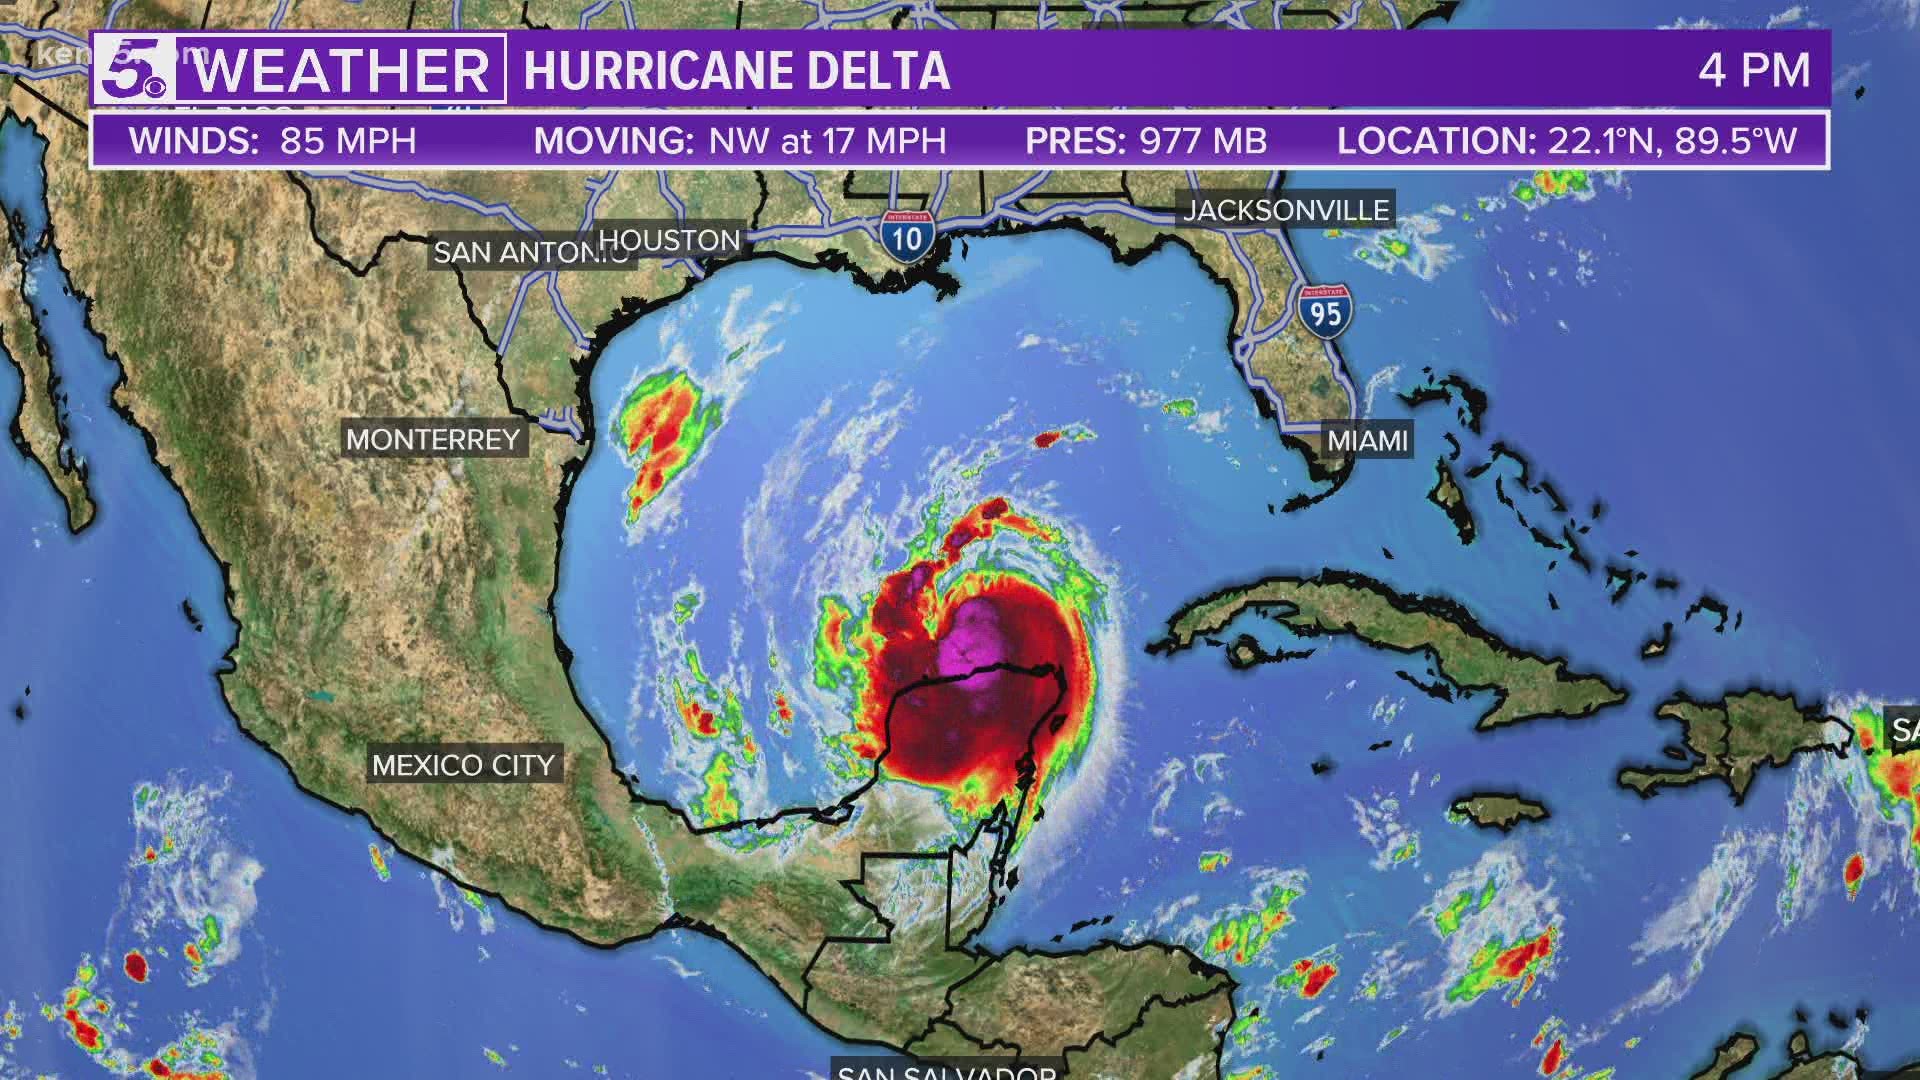 Hurricane Delta has made its way to the Gulf of Mexico and is expected to gain some of its strength back before making landfall again later this week.